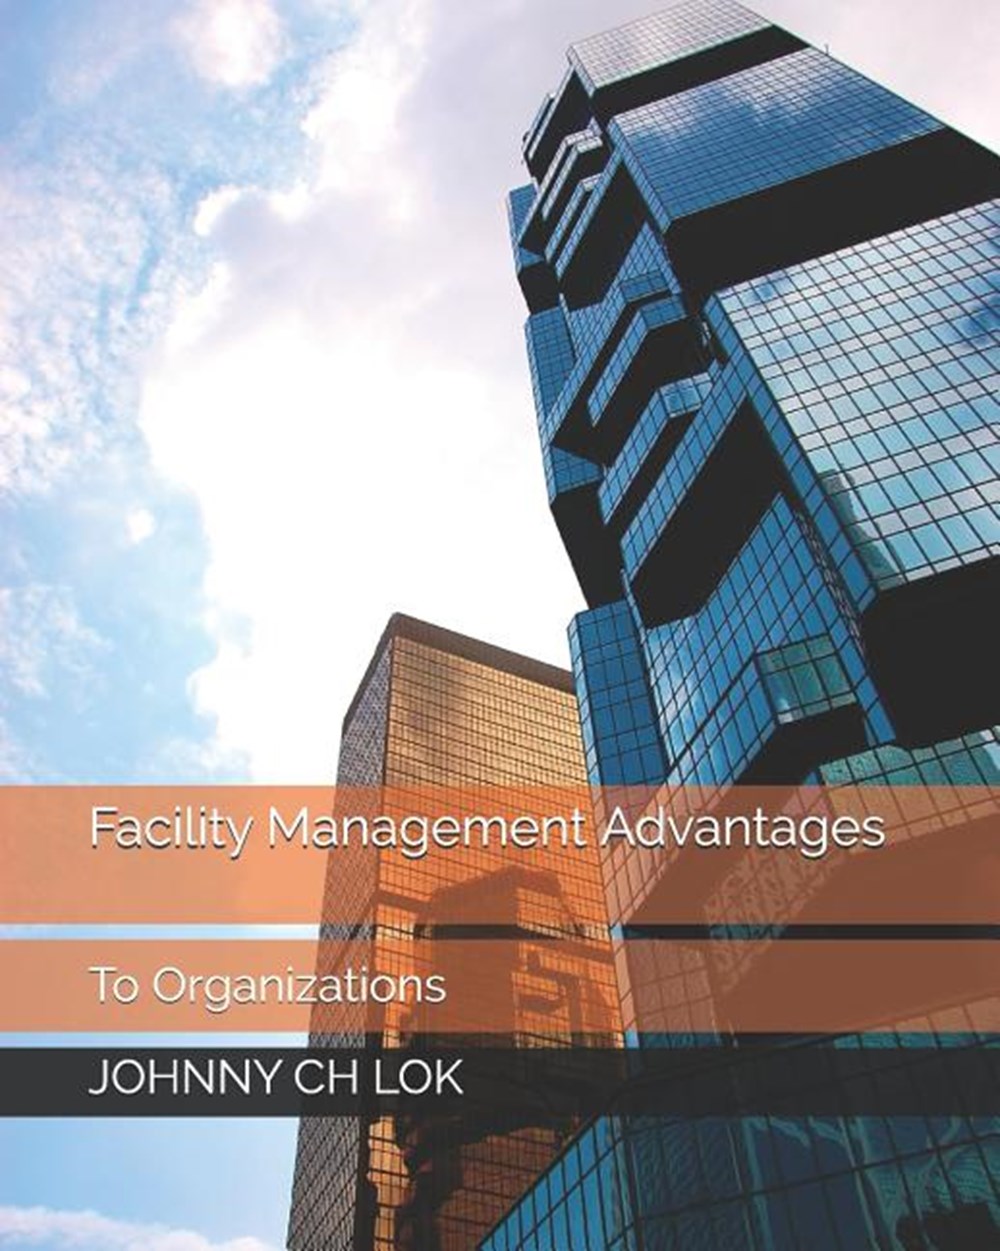 Facility Management Advantages to: Organizations